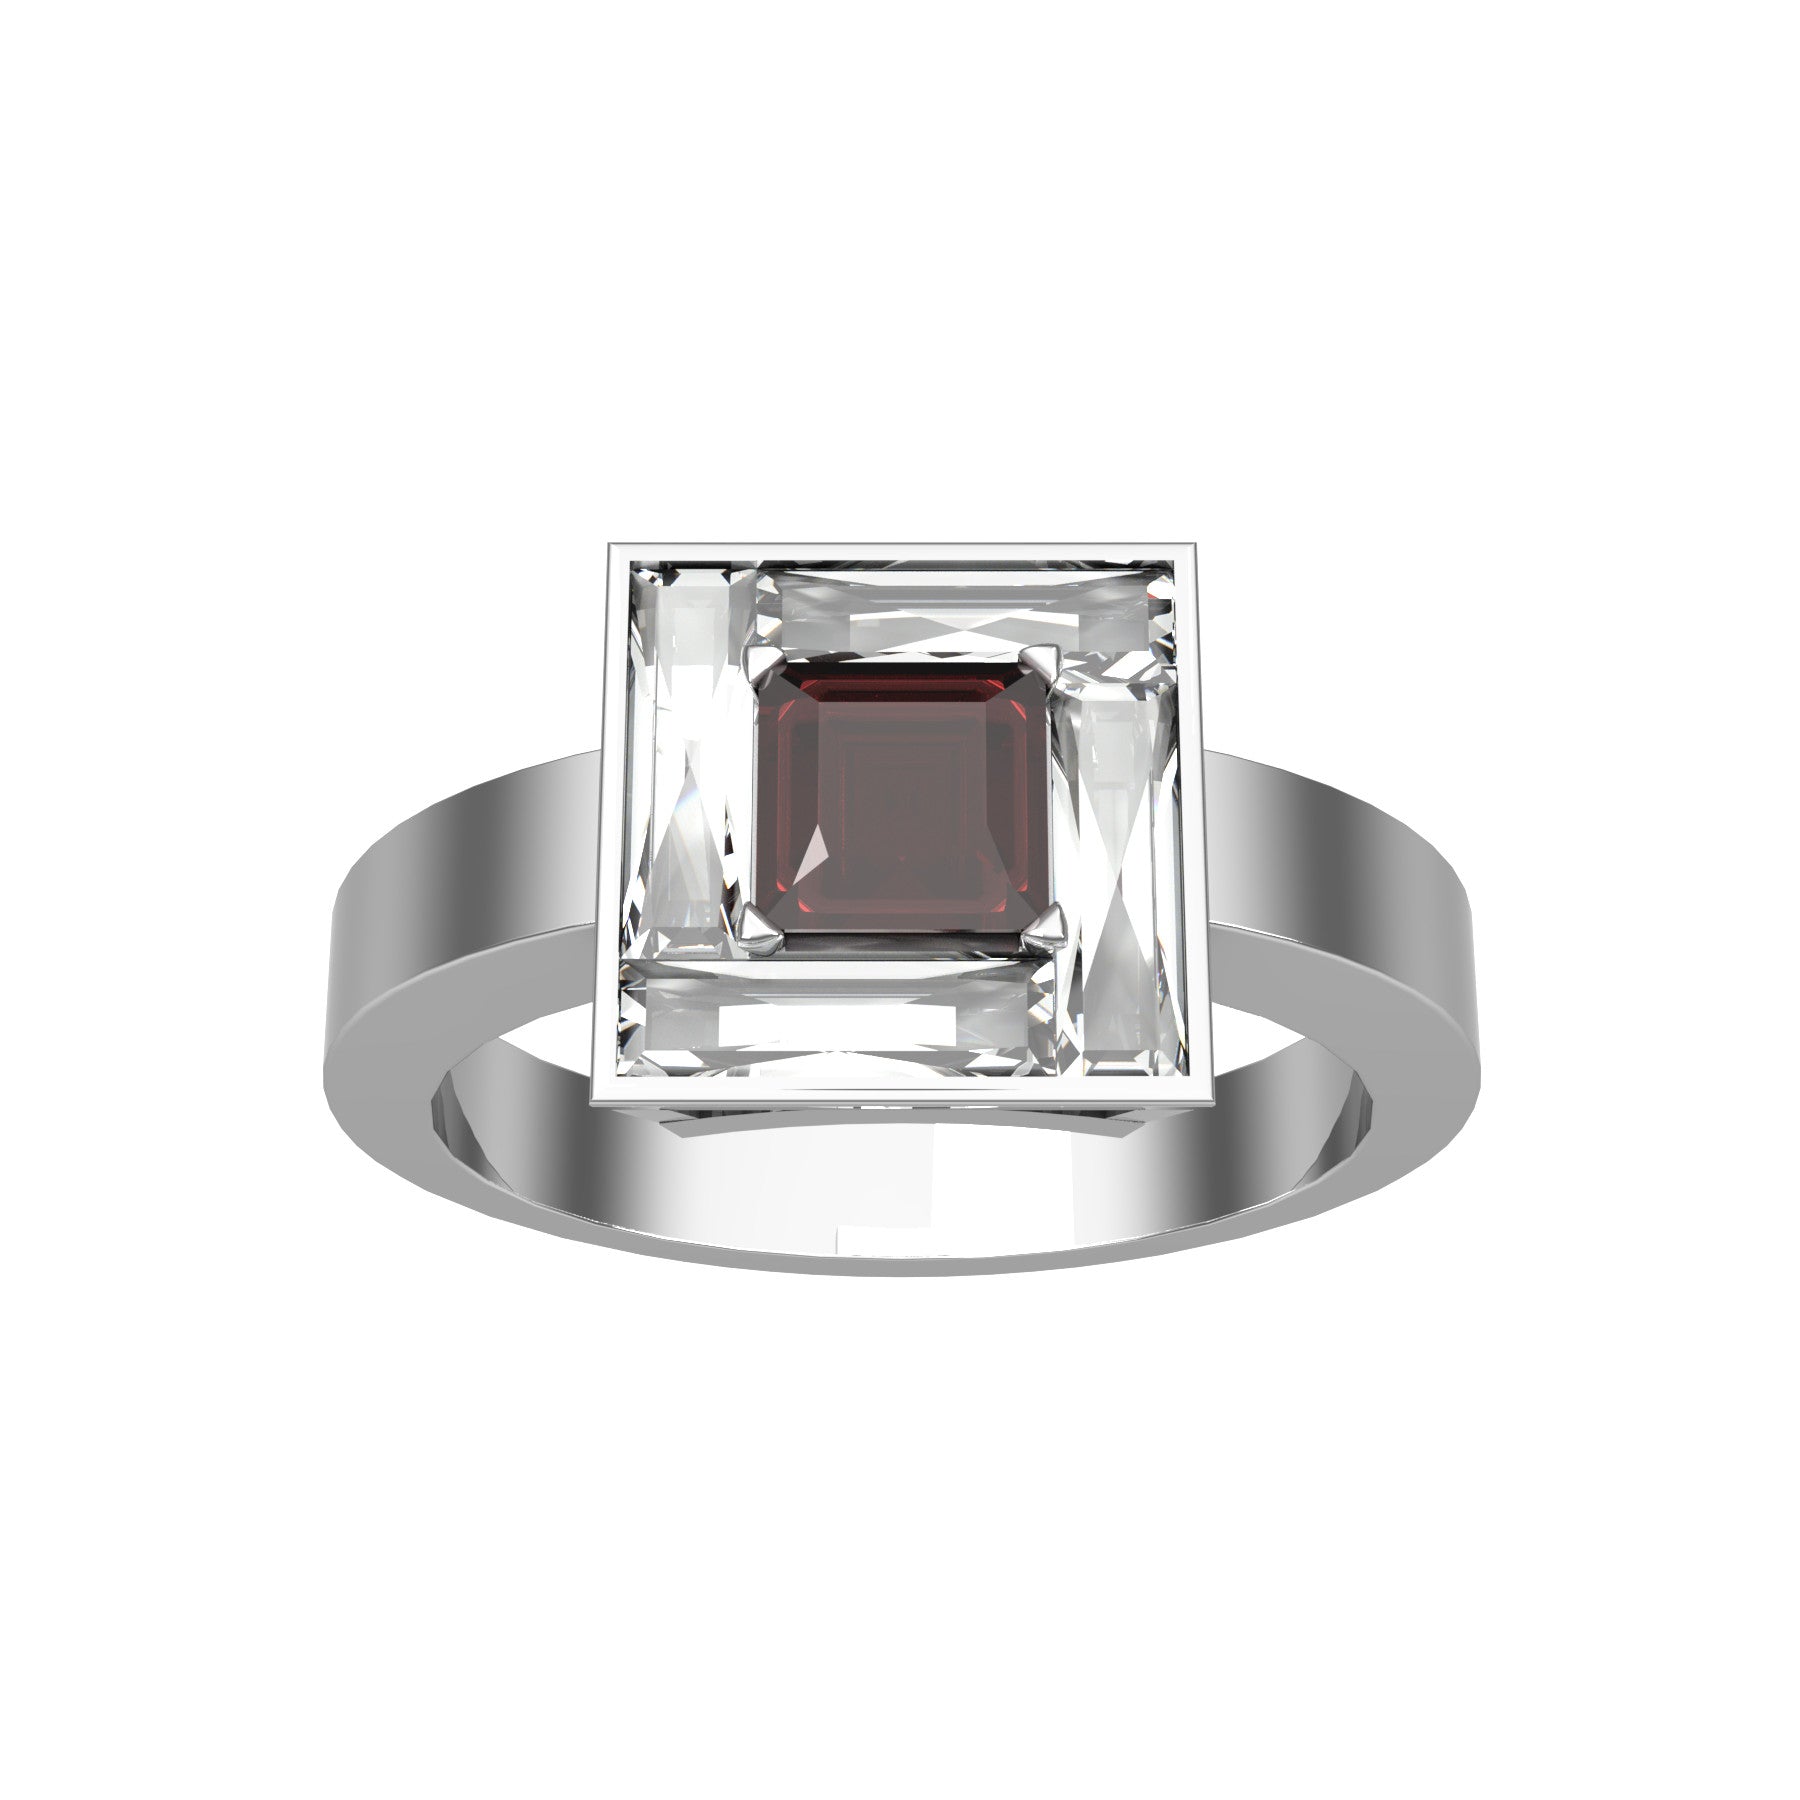 true passion ring, 18 K white gold, about 0,34 ct  square emerald natural ruby, natural baguette diamonds, weight about 4,8 g. (0.17 oz), width 9,3 mm max